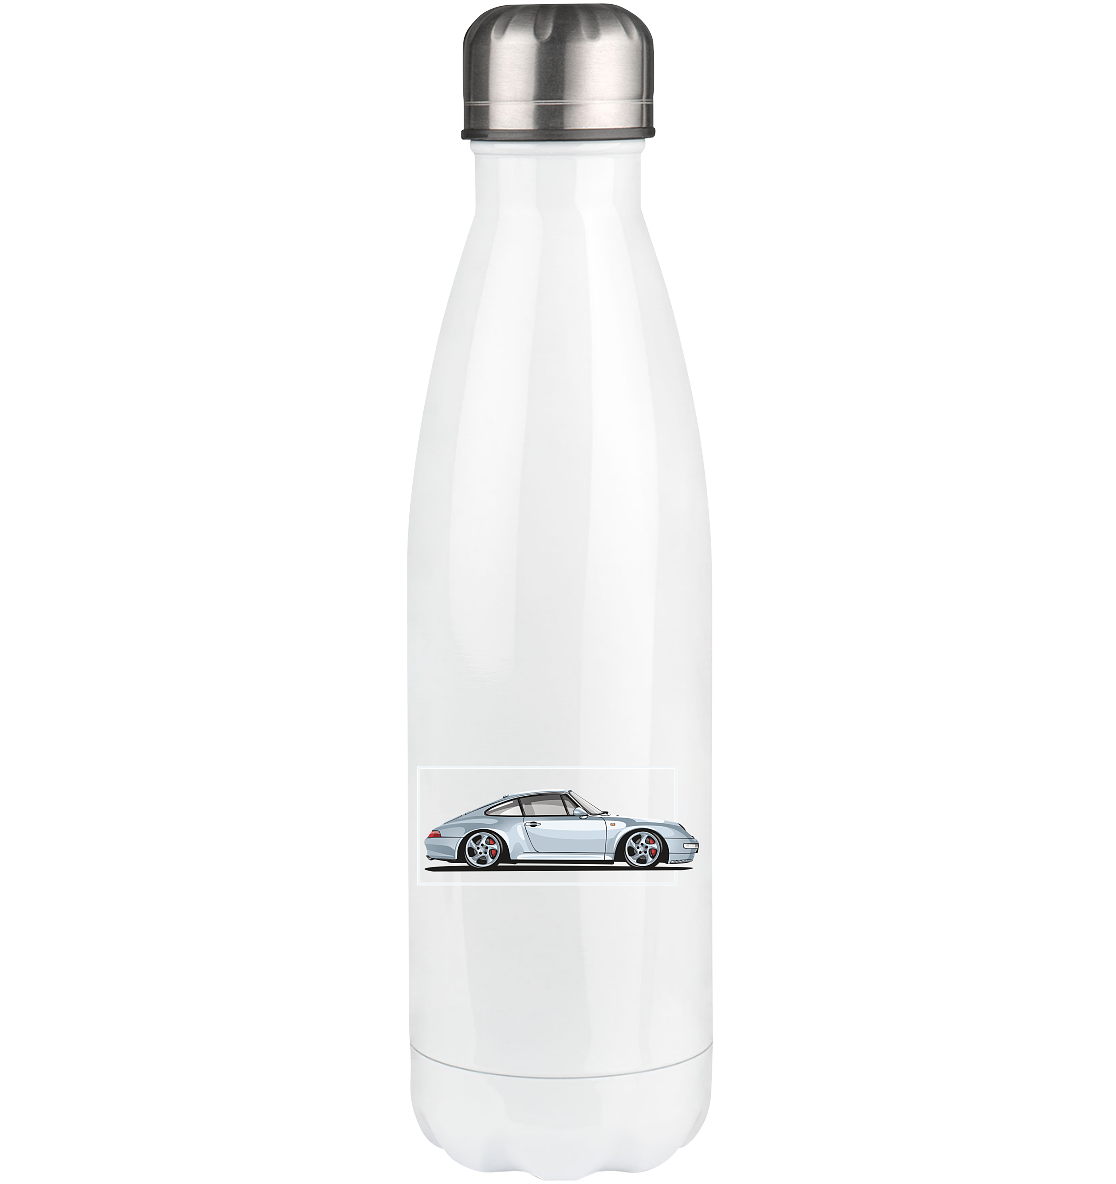 The Last Aircooled - Thermoflasche 500ml